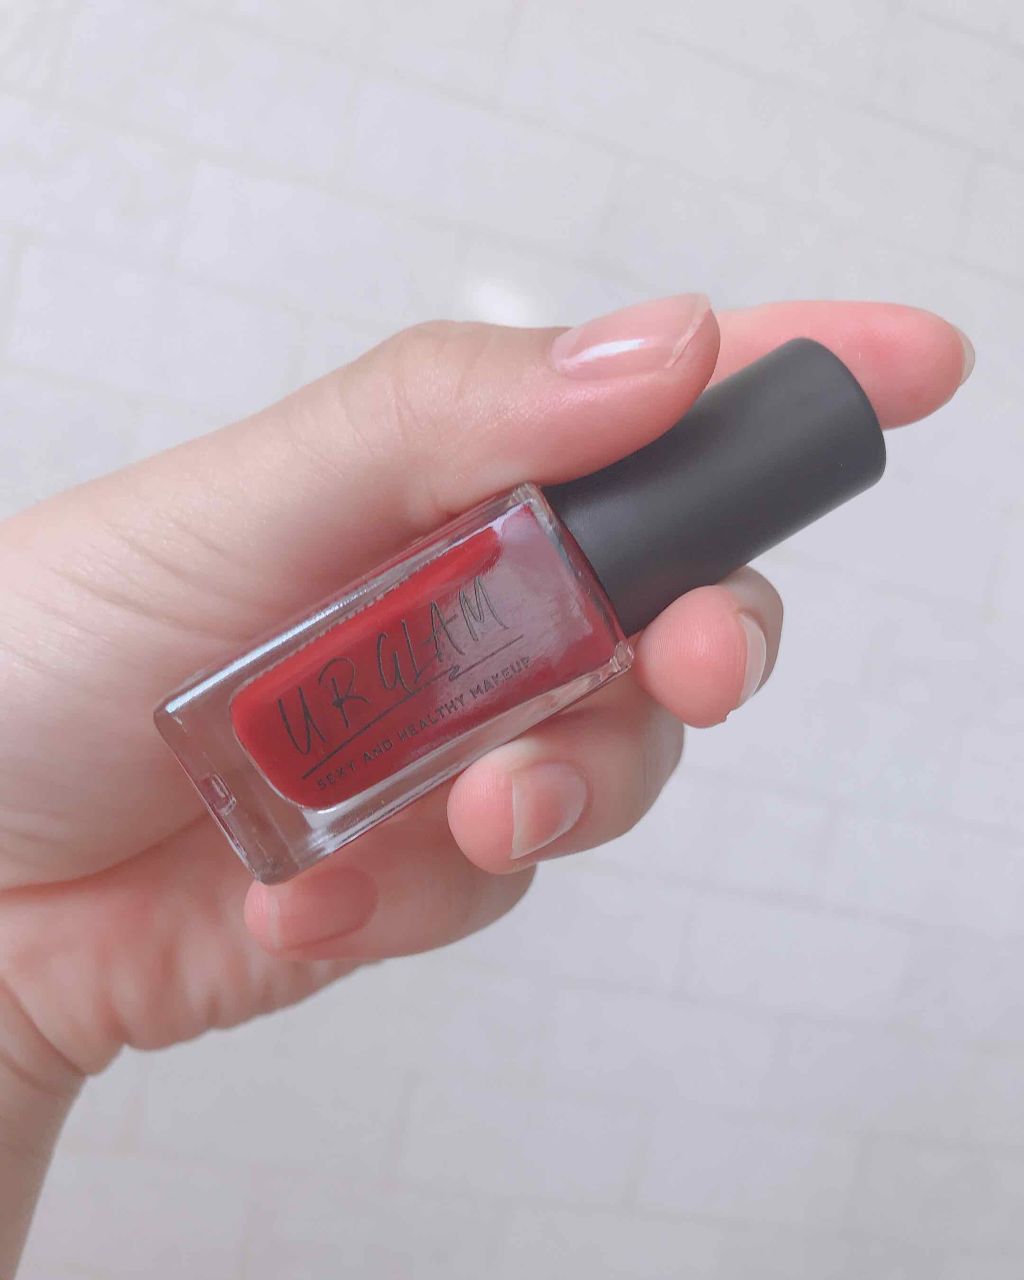 Ur Glam Color Nail Selectiondaisoの口コミ超優秀100均で買える